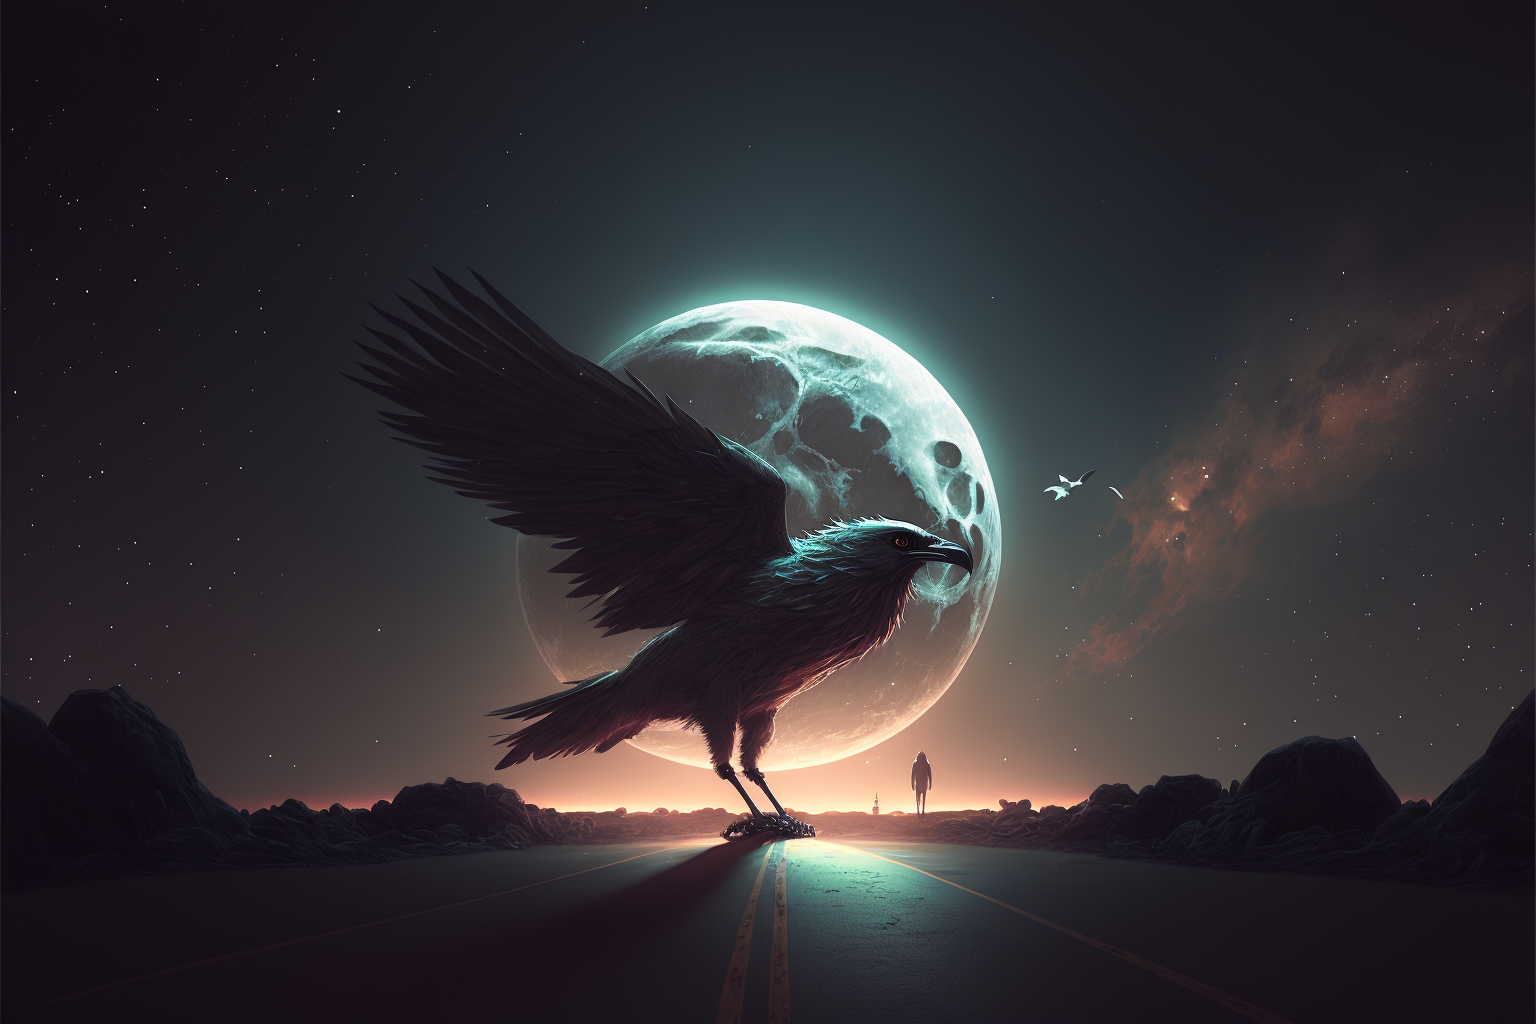 Crows don’t get enough respect. So, here’s a painting of a noble crow, wings spread, standing in heroic profile before a rising full moon. Why not?